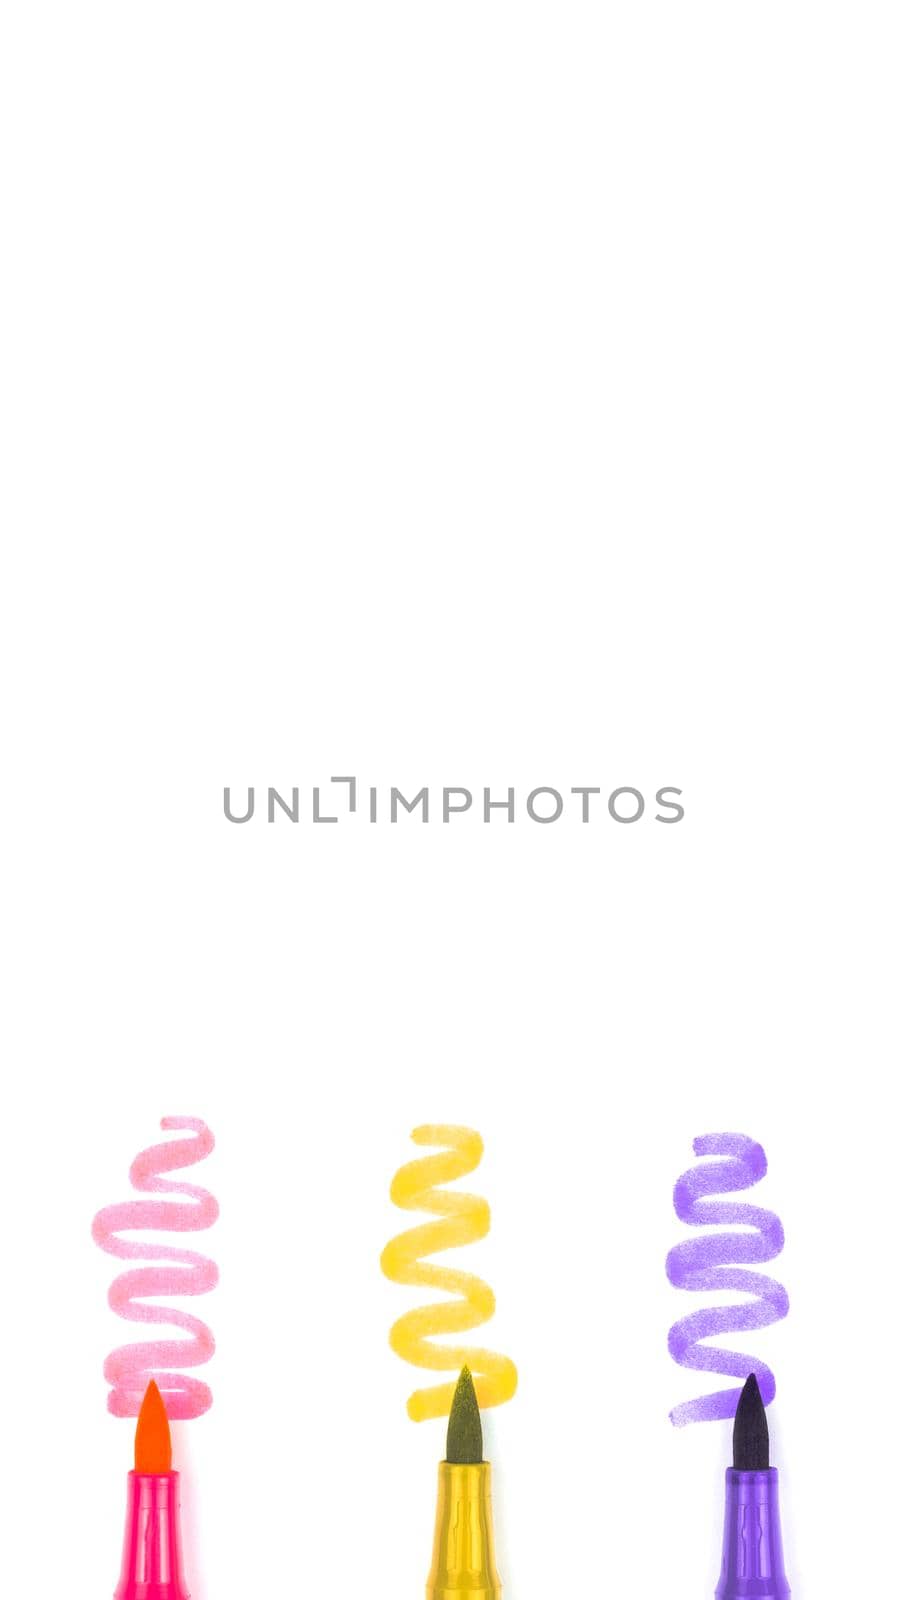 Three multicolored markers on a white background with copy space.